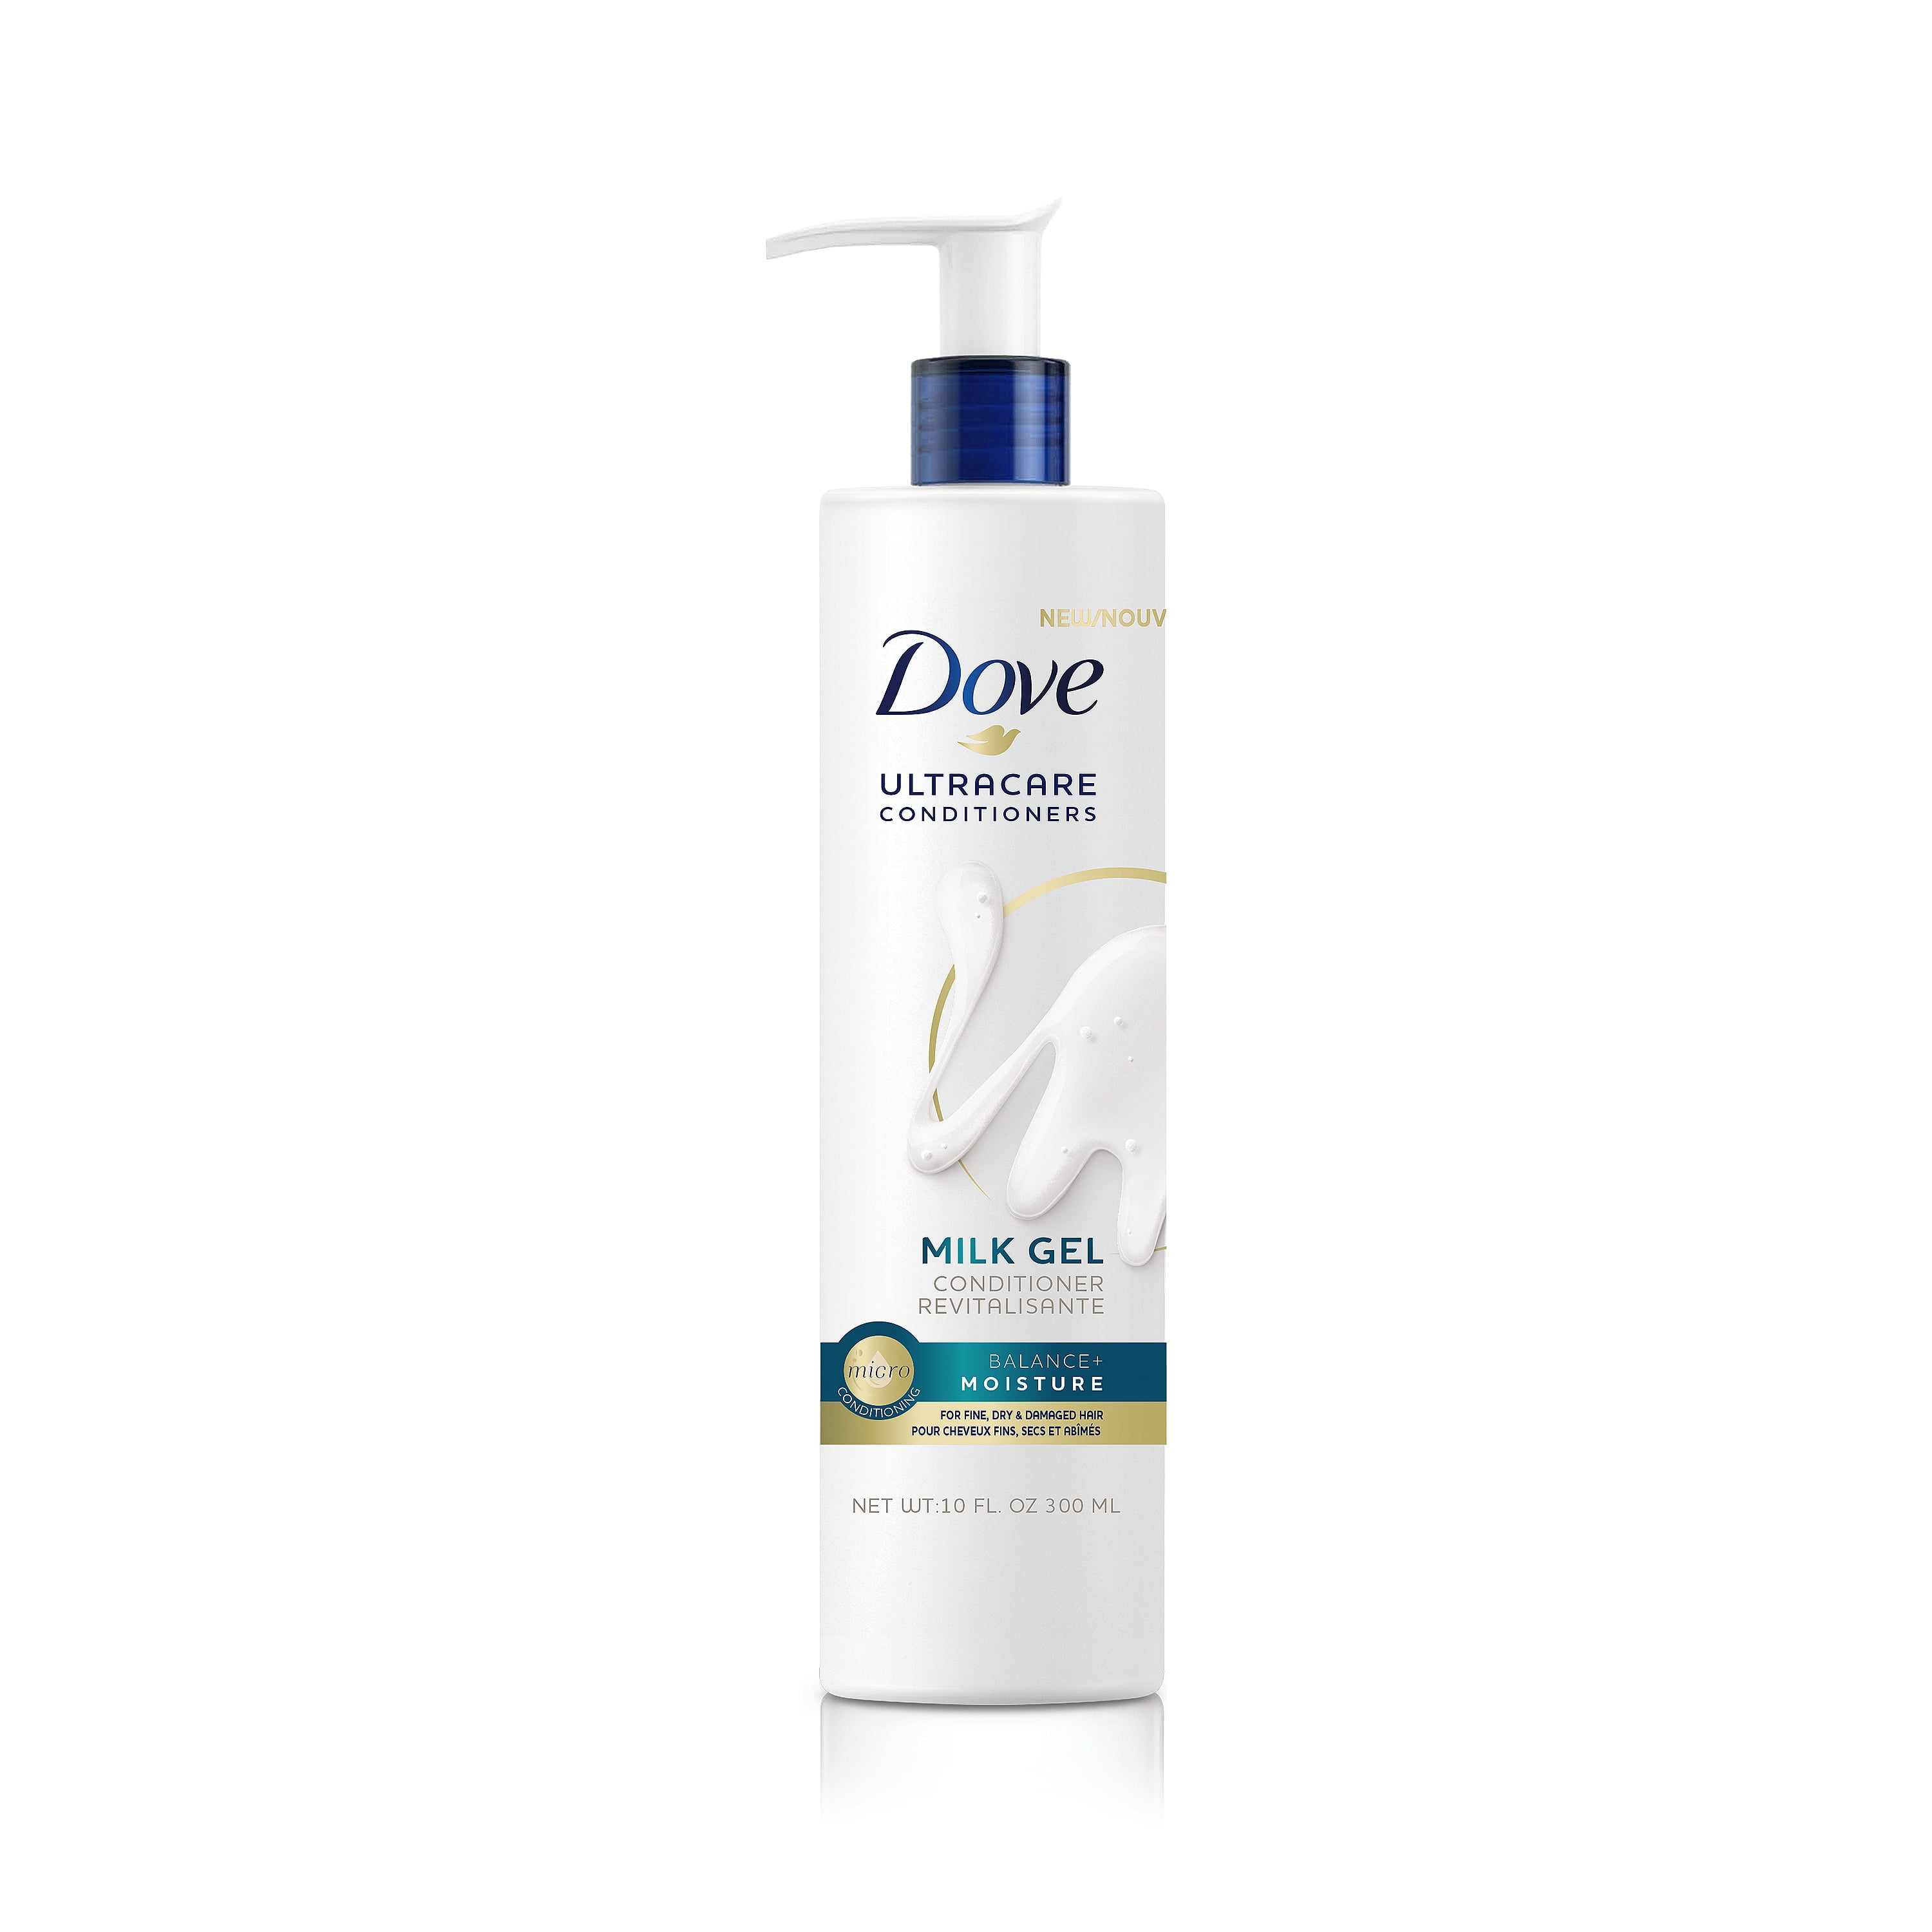 Dove UltraCare Conditioners Milk-Gel For Fine, Dry, Damaged Hair Balanced  Moisture 10 oz 